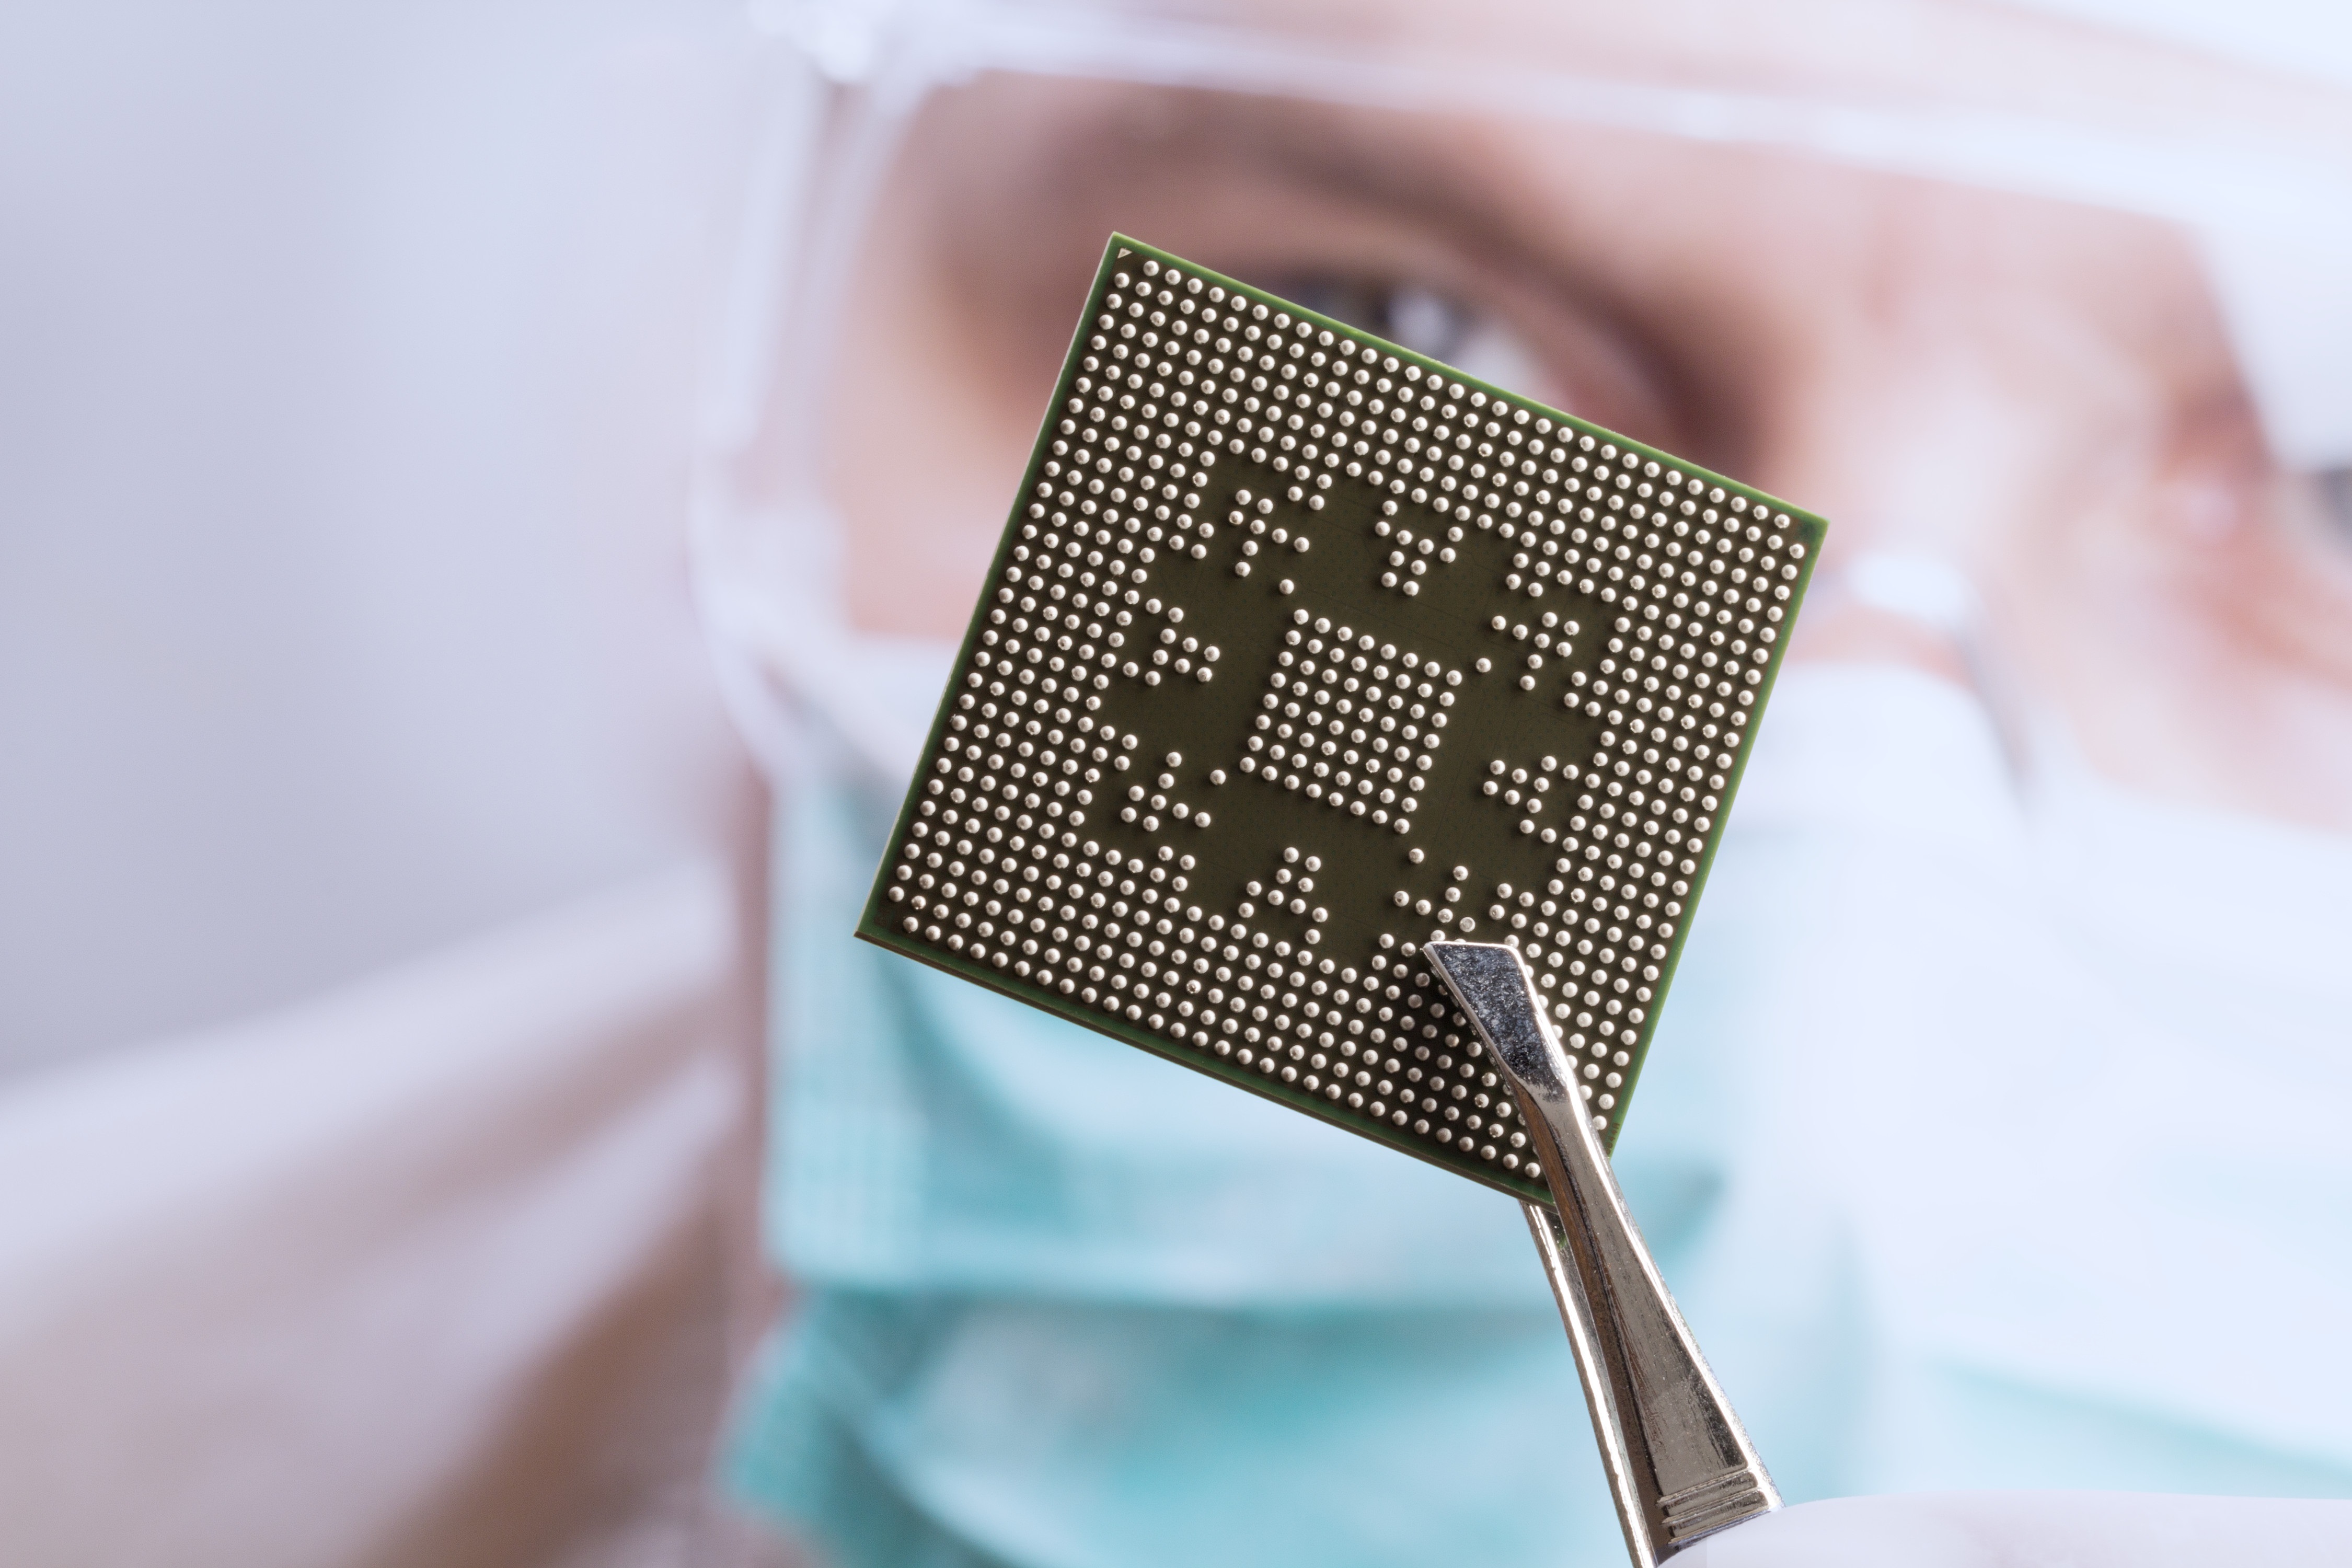 Engineer examining a new integrated circuit